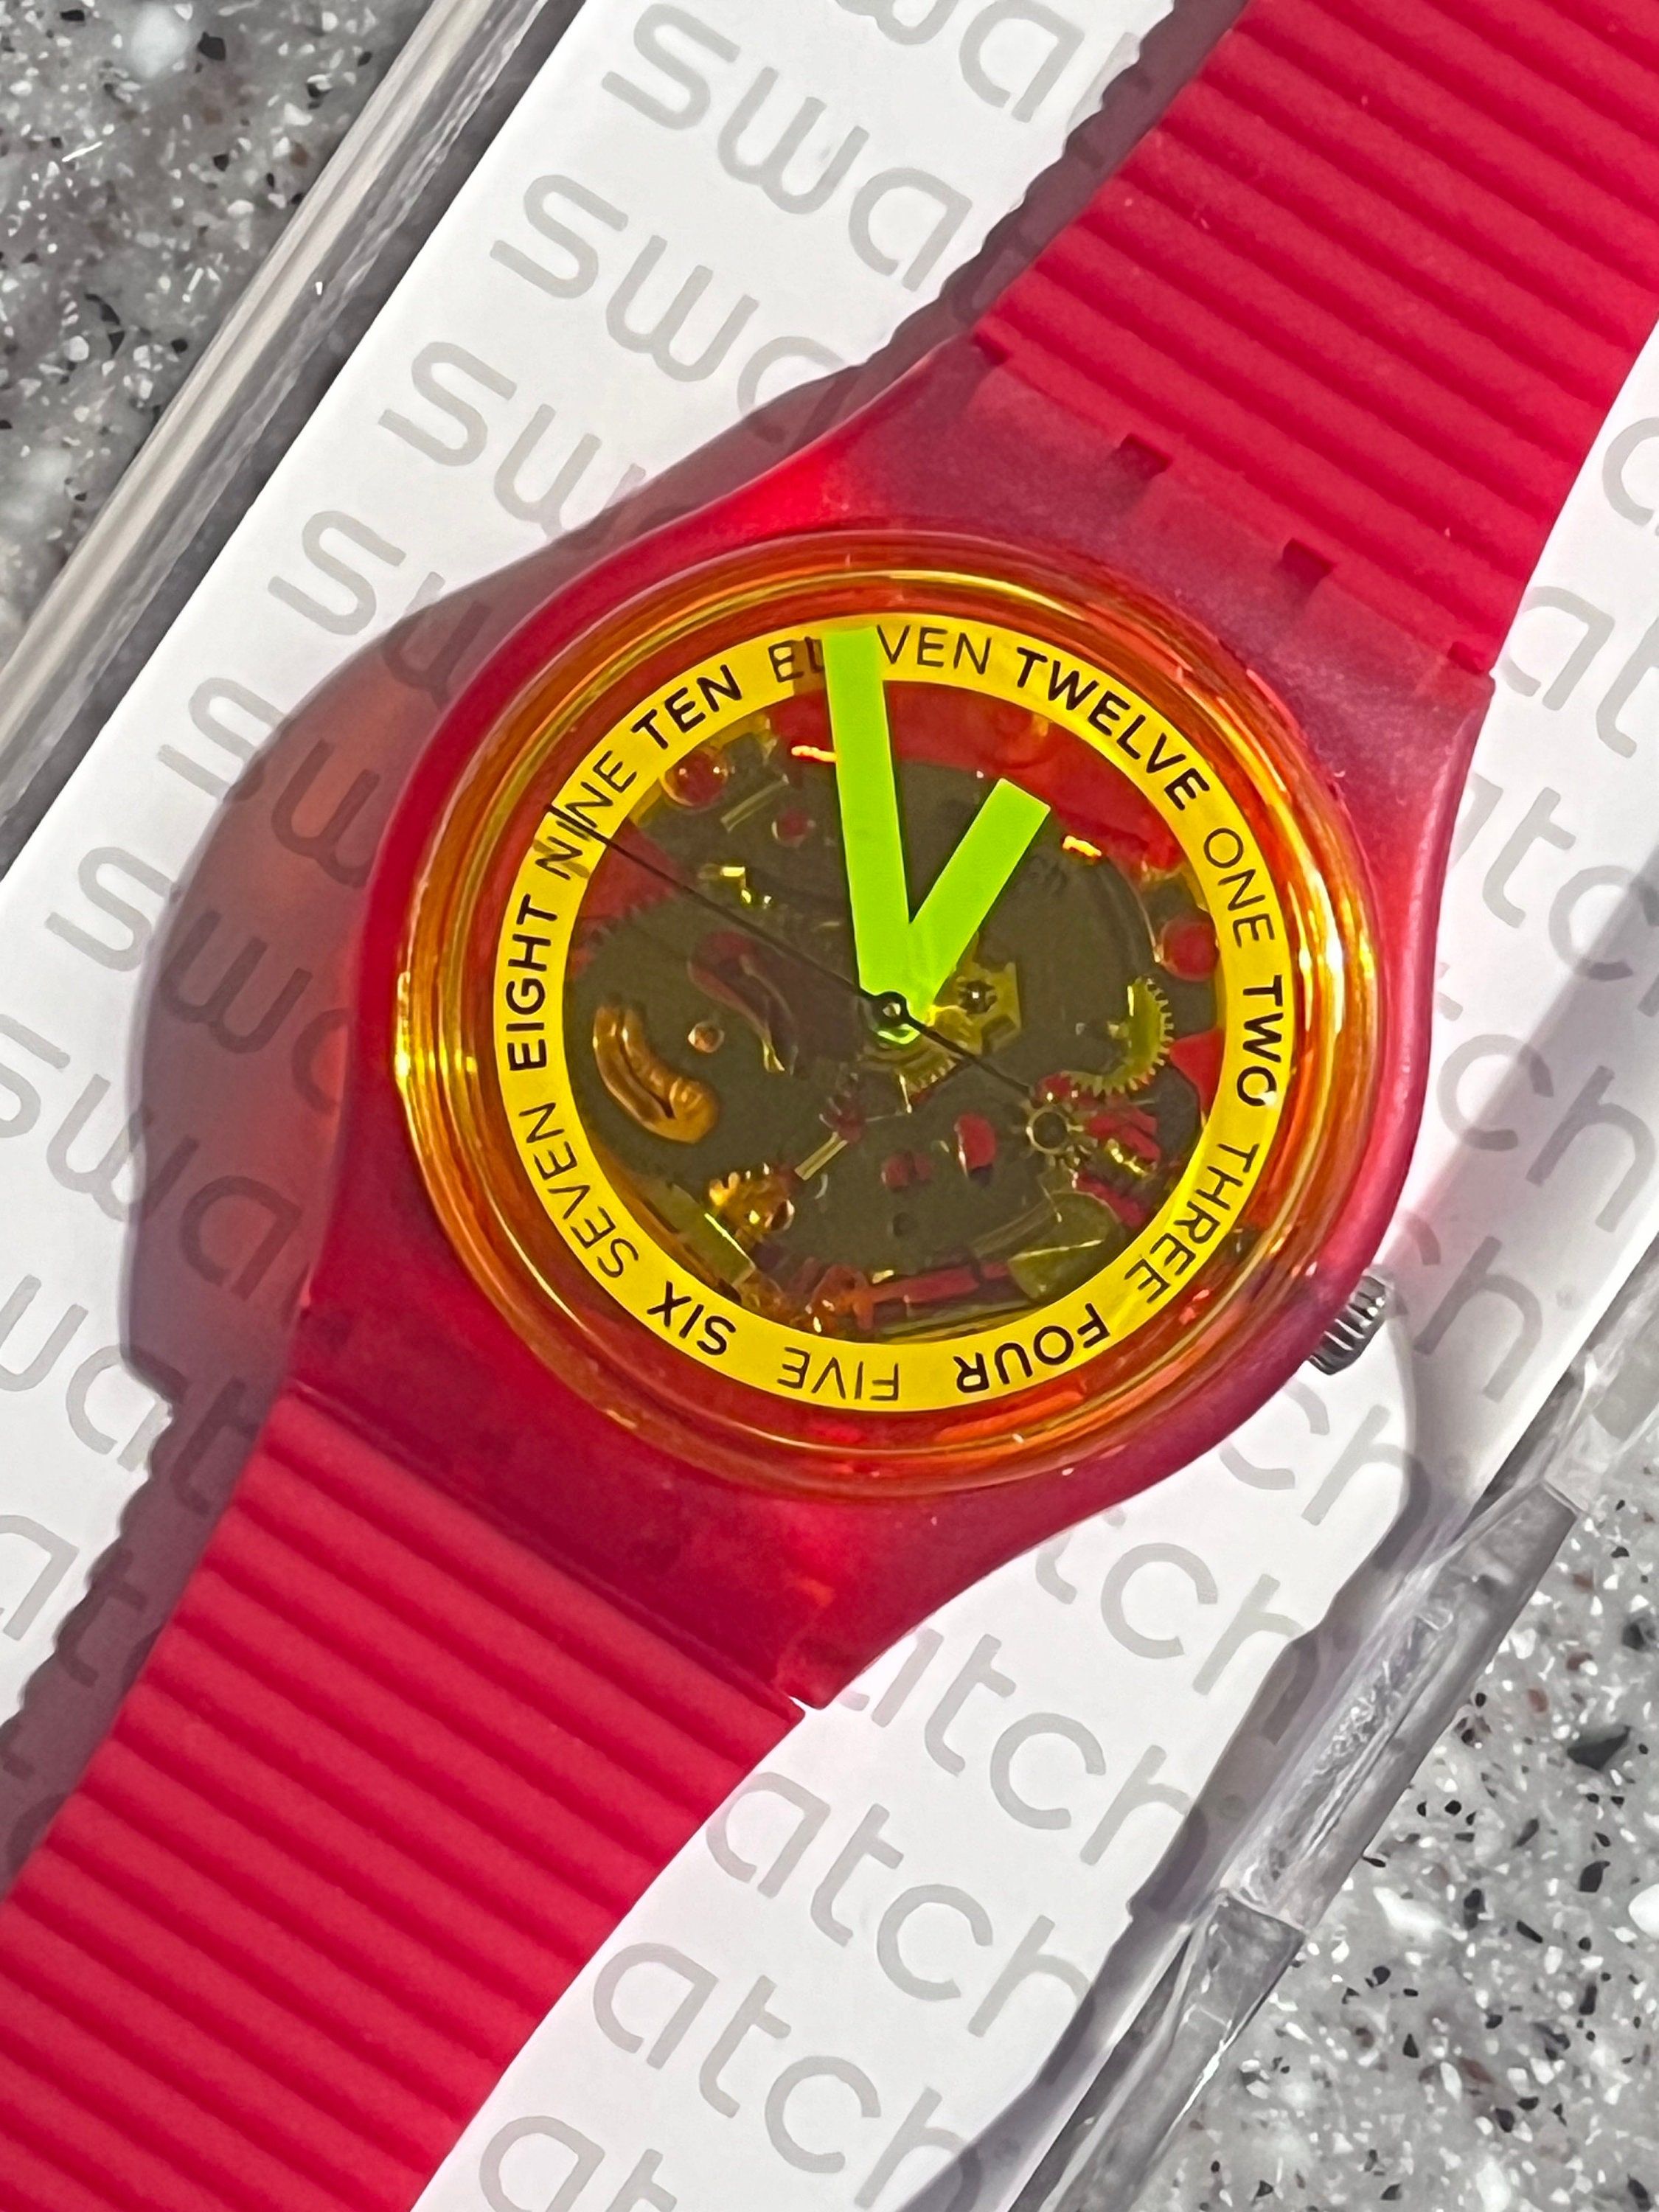 7 Swatch Watches You Can Resell for Hundreds of Dollars (or More)